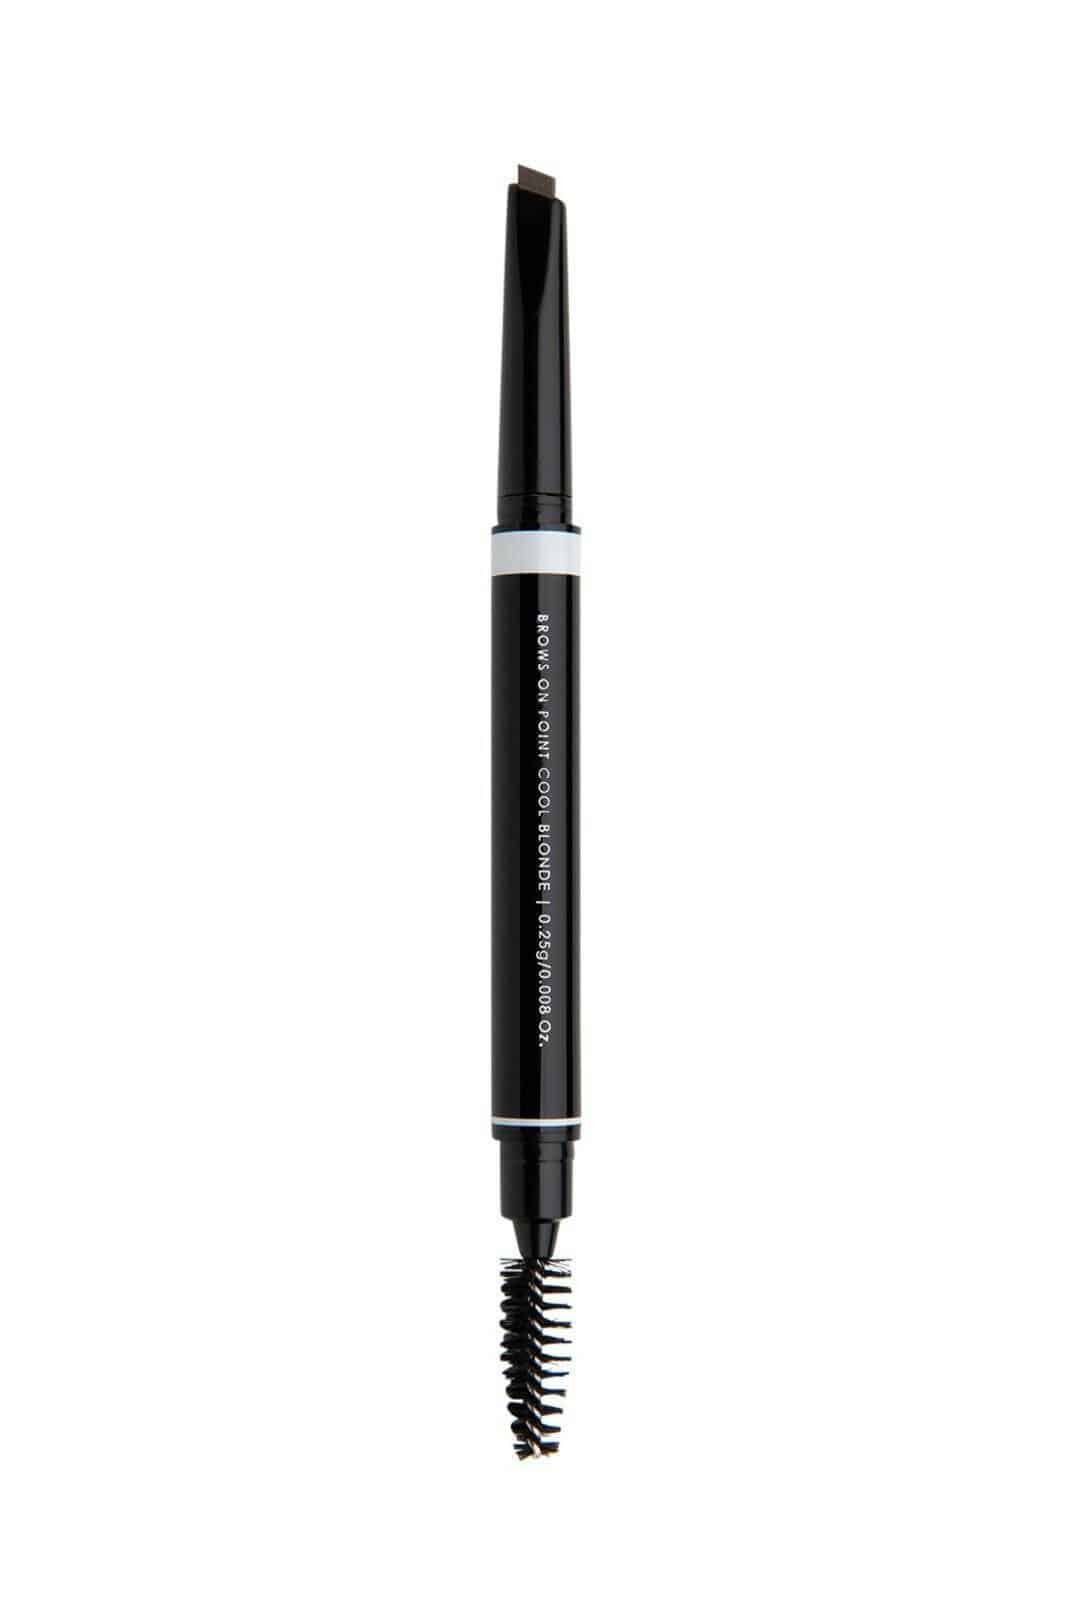 Garbo & Kelly Cool Blonde - Brows on Point x 1  Brow Pencil - On Line Hair Depot